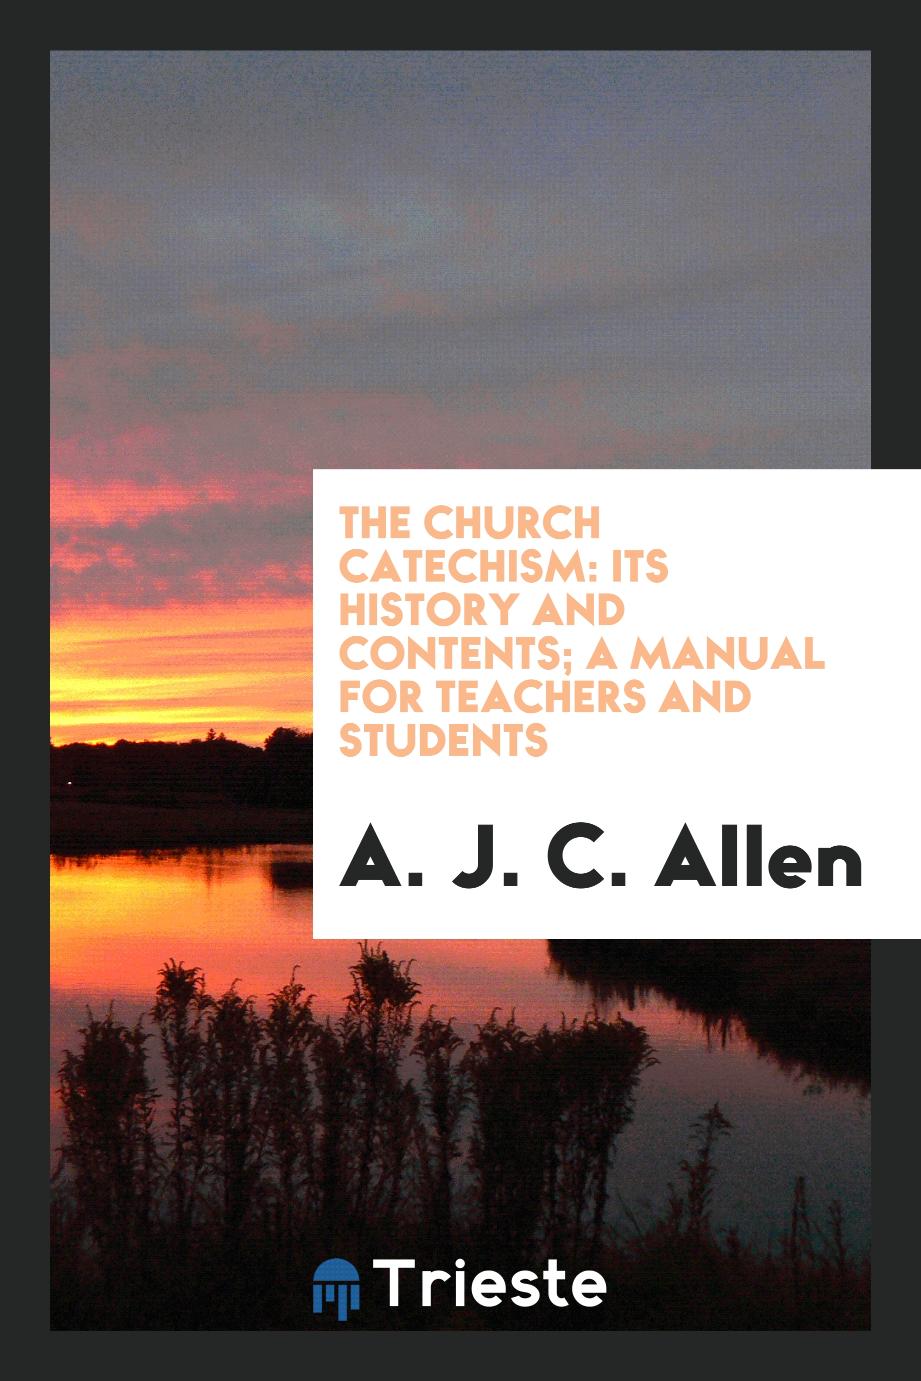 The Church Catechism: its history and contents; a manual for teachers and students